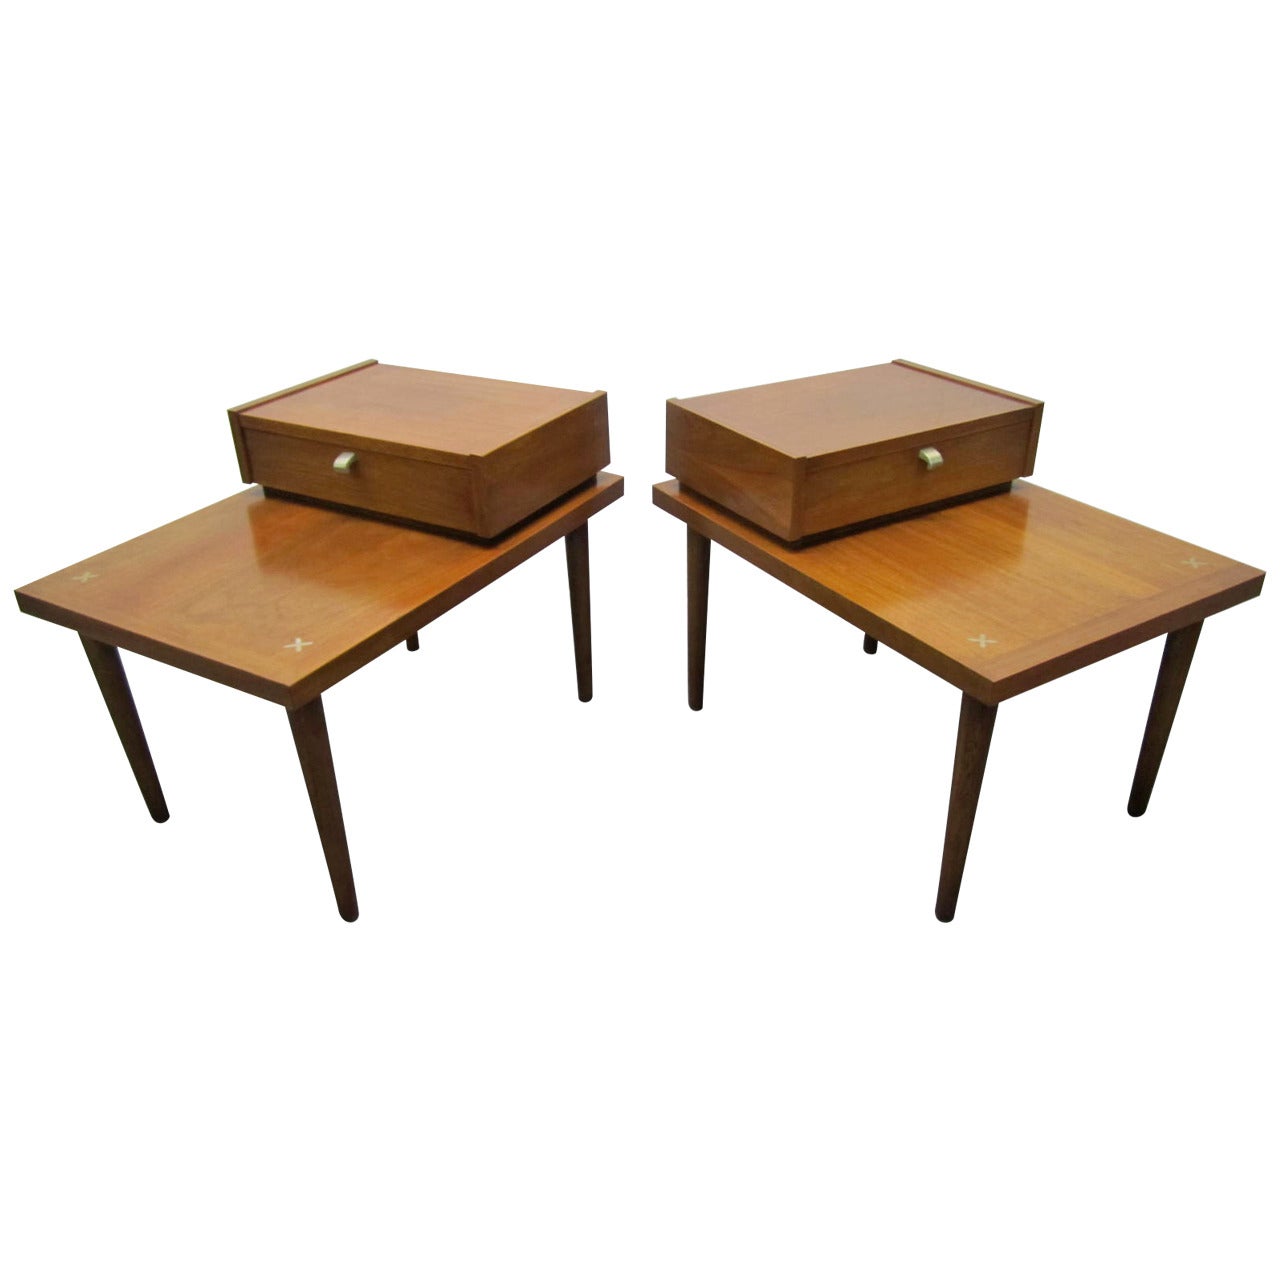 Handsome Pair of American of Martinsville, Mid-Century Modern End Tables